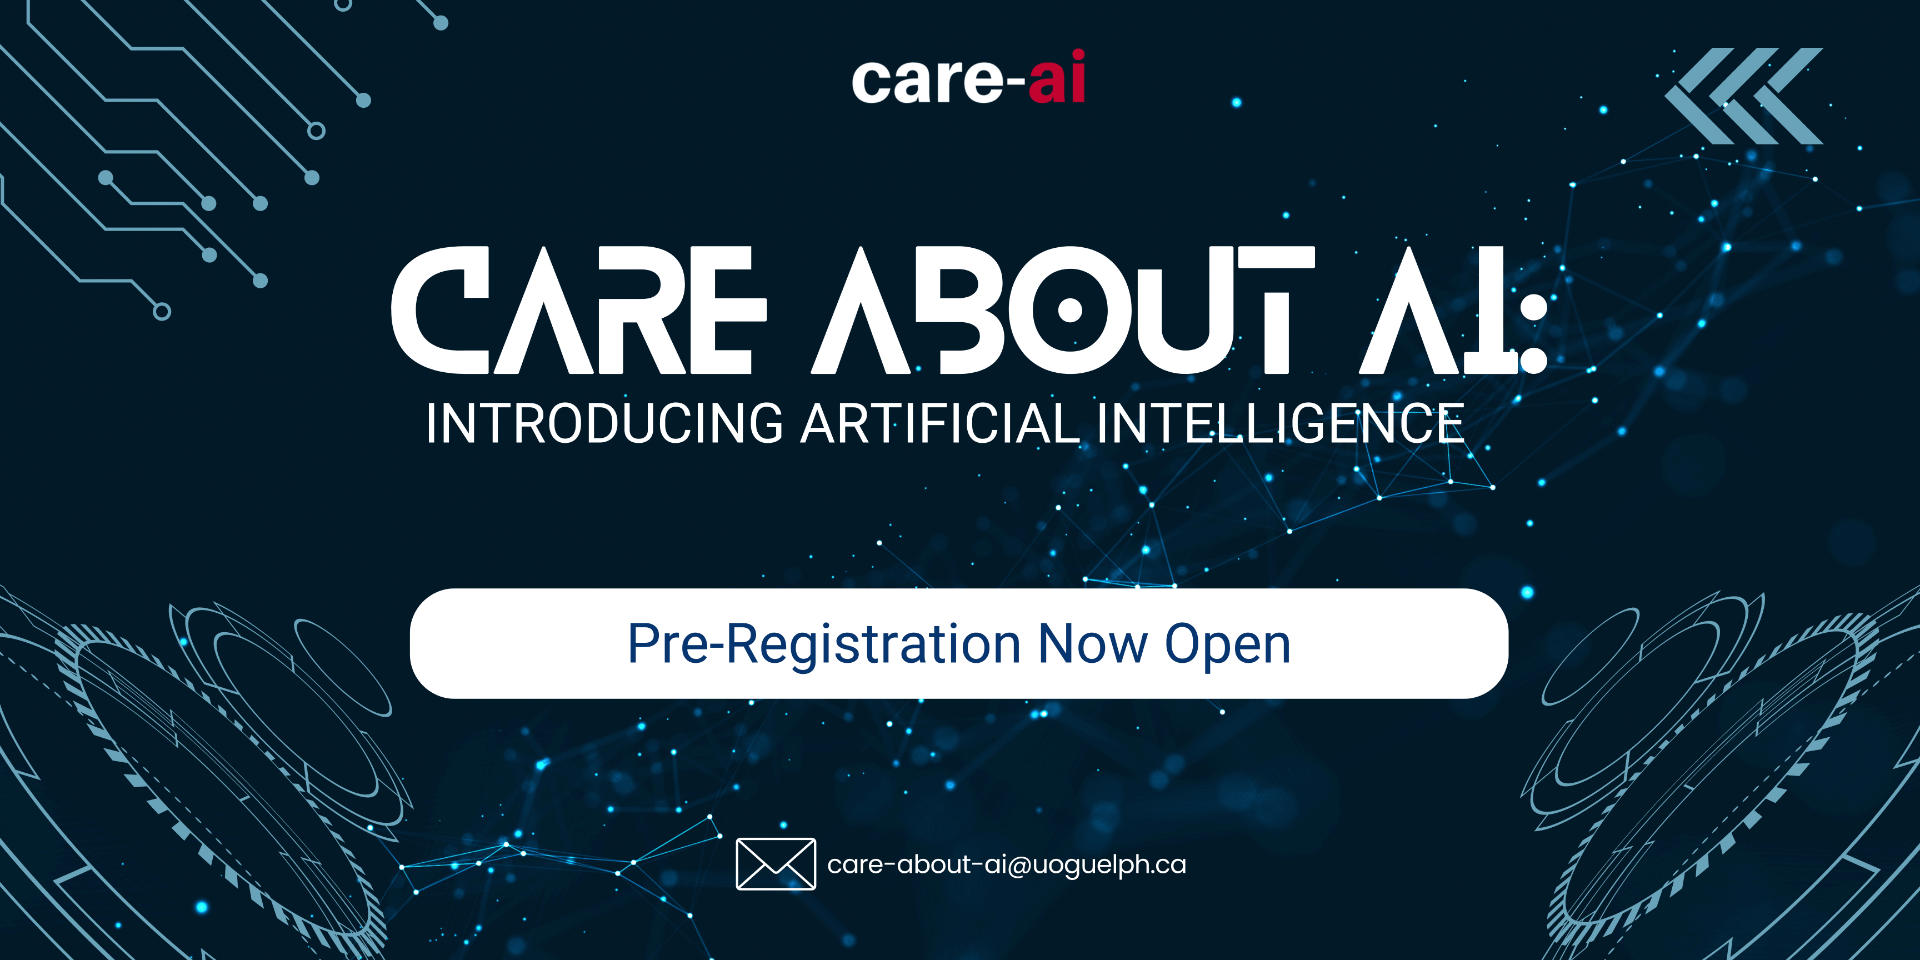 Dark blue background with light blue digital designs. Care-ai Care about ai Introducing Artificial Intelligence Pre-Registration Now Open Email care-about-ai@uoguelph.ca